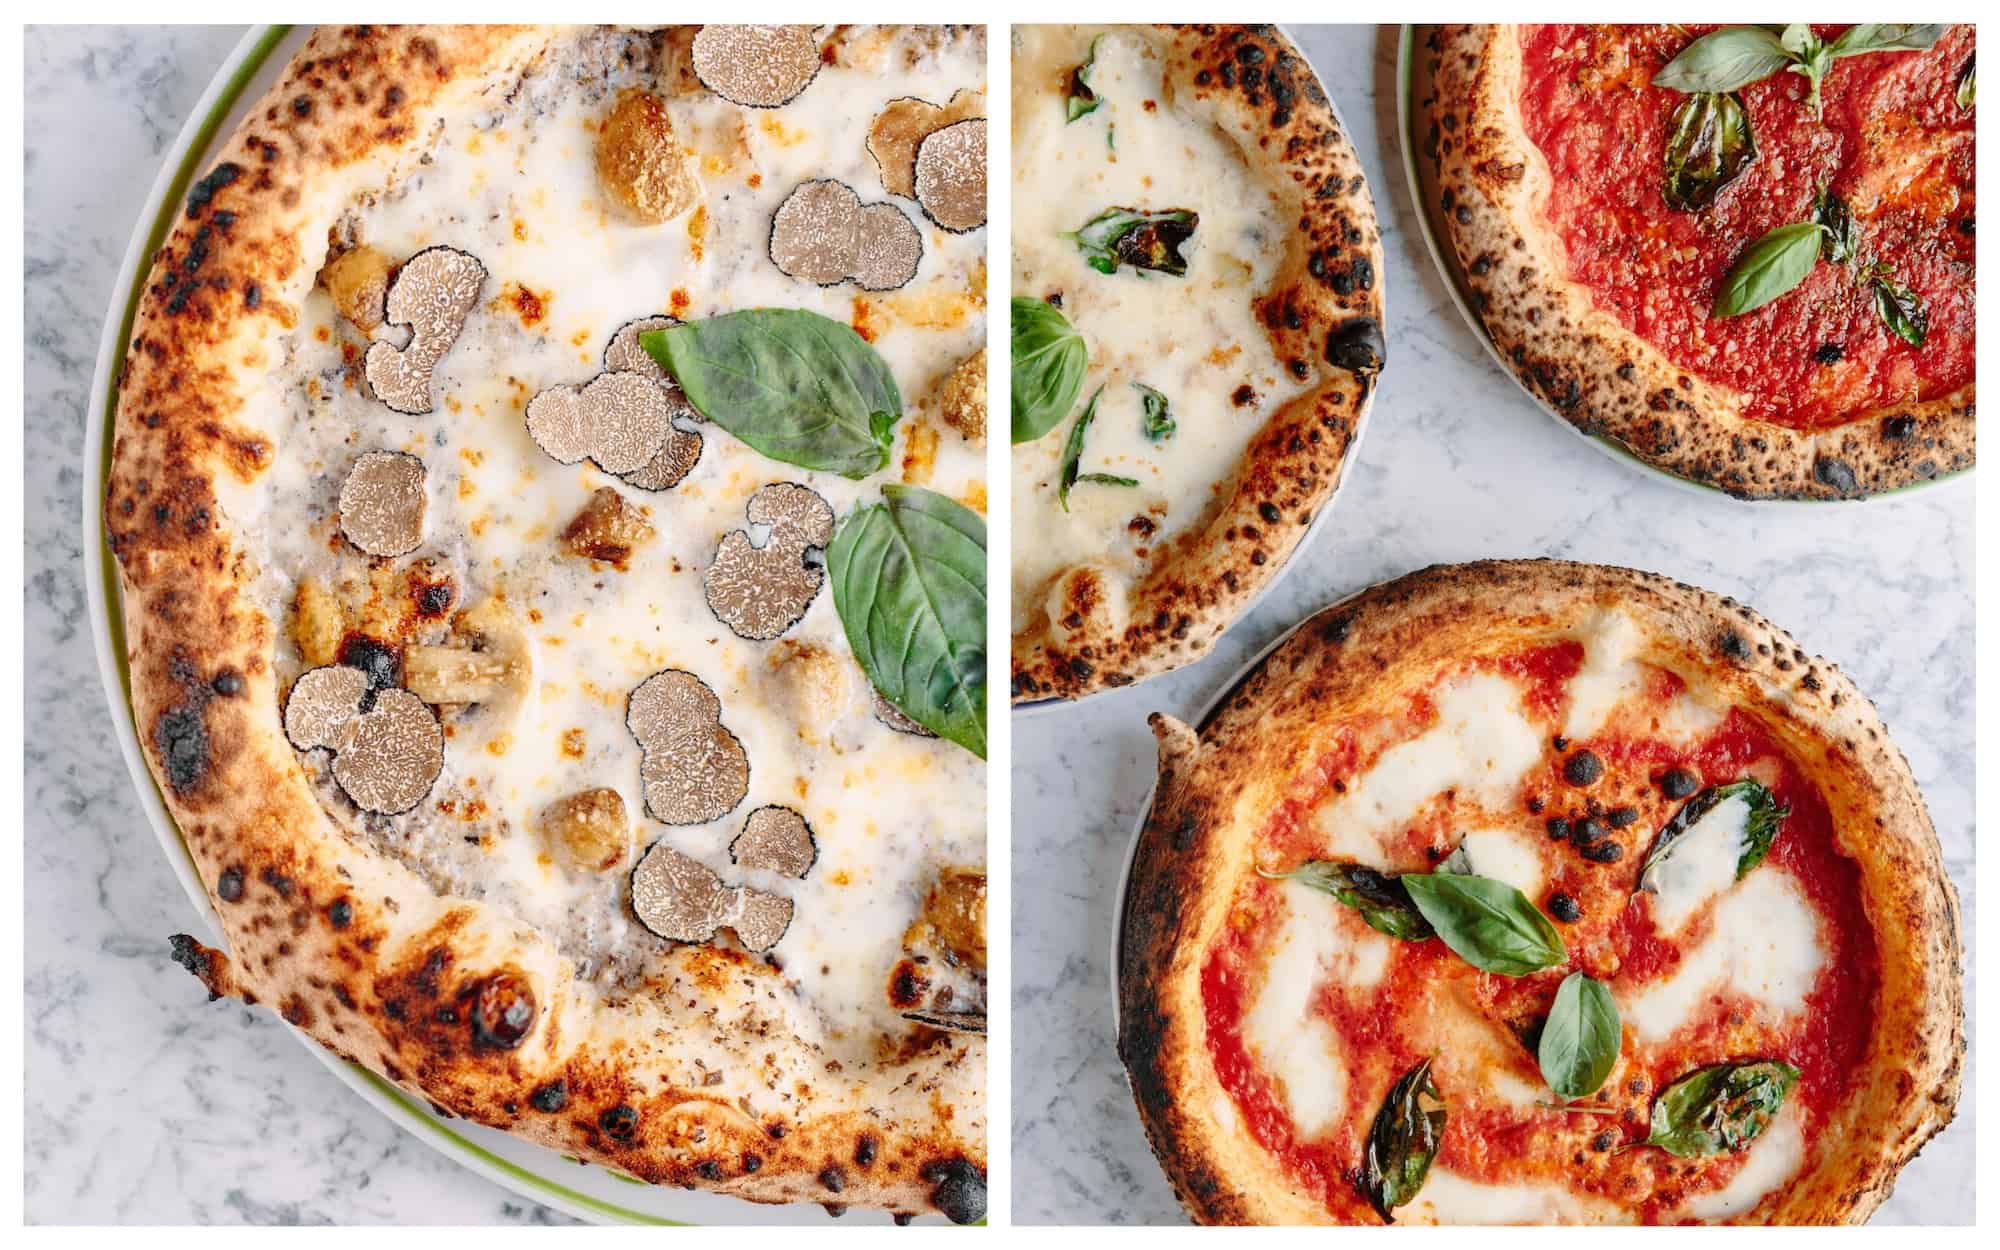 The Big Mamma Group offers Trendy, Fresh, Authentic Italian Dining in Paris like truffle pizzas (left) or with simple mozzarella and tomato toppings (right).